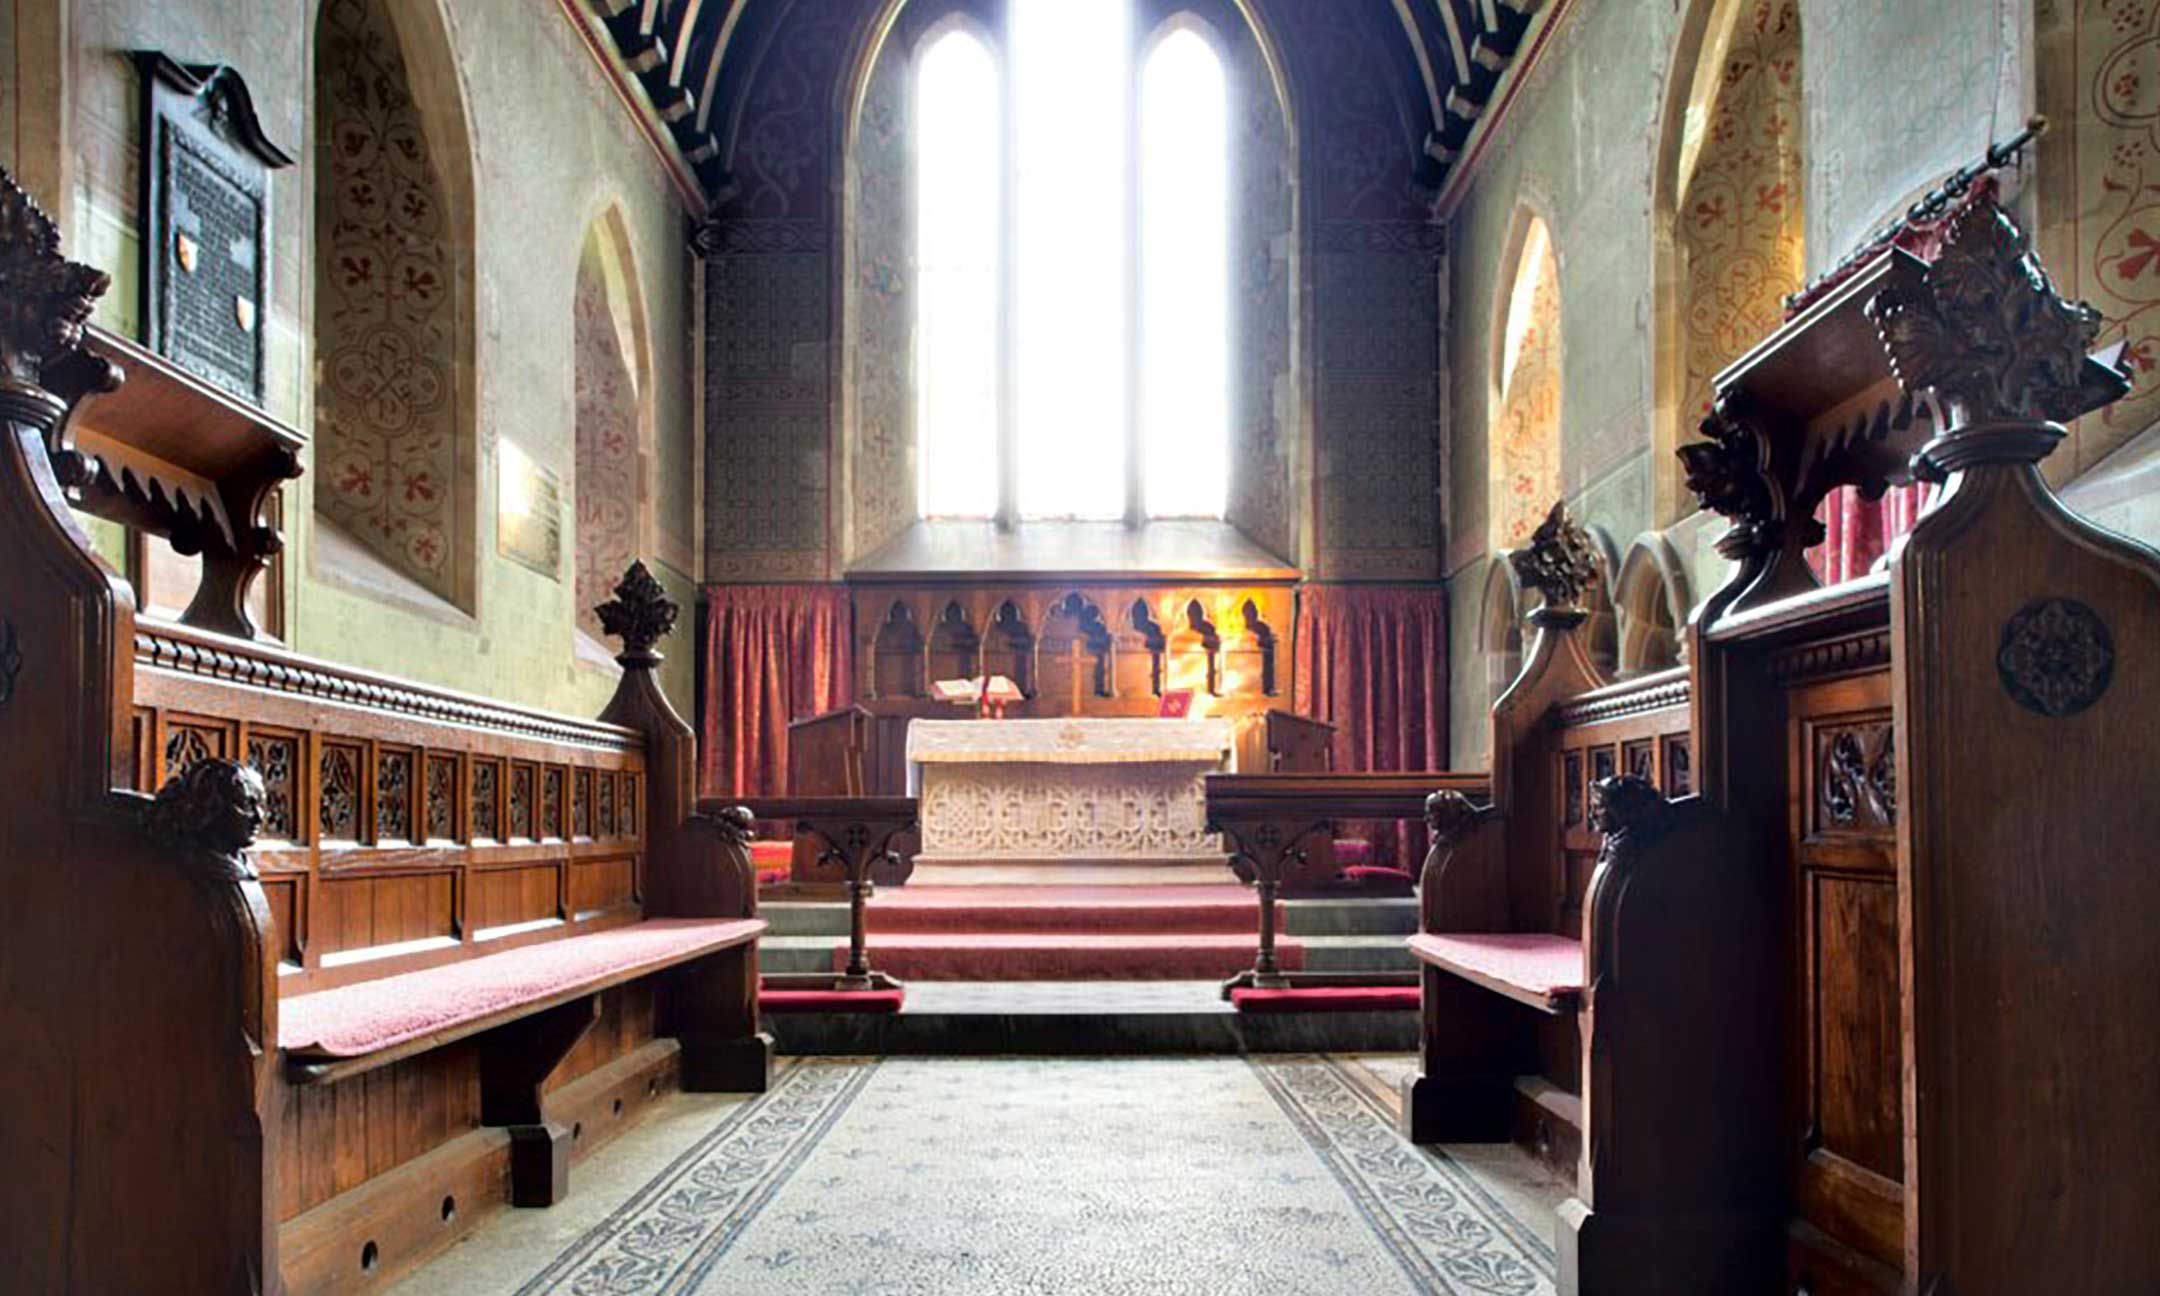 Colour photo of the inside of a church, looking towards a simple altar and stained glass window.